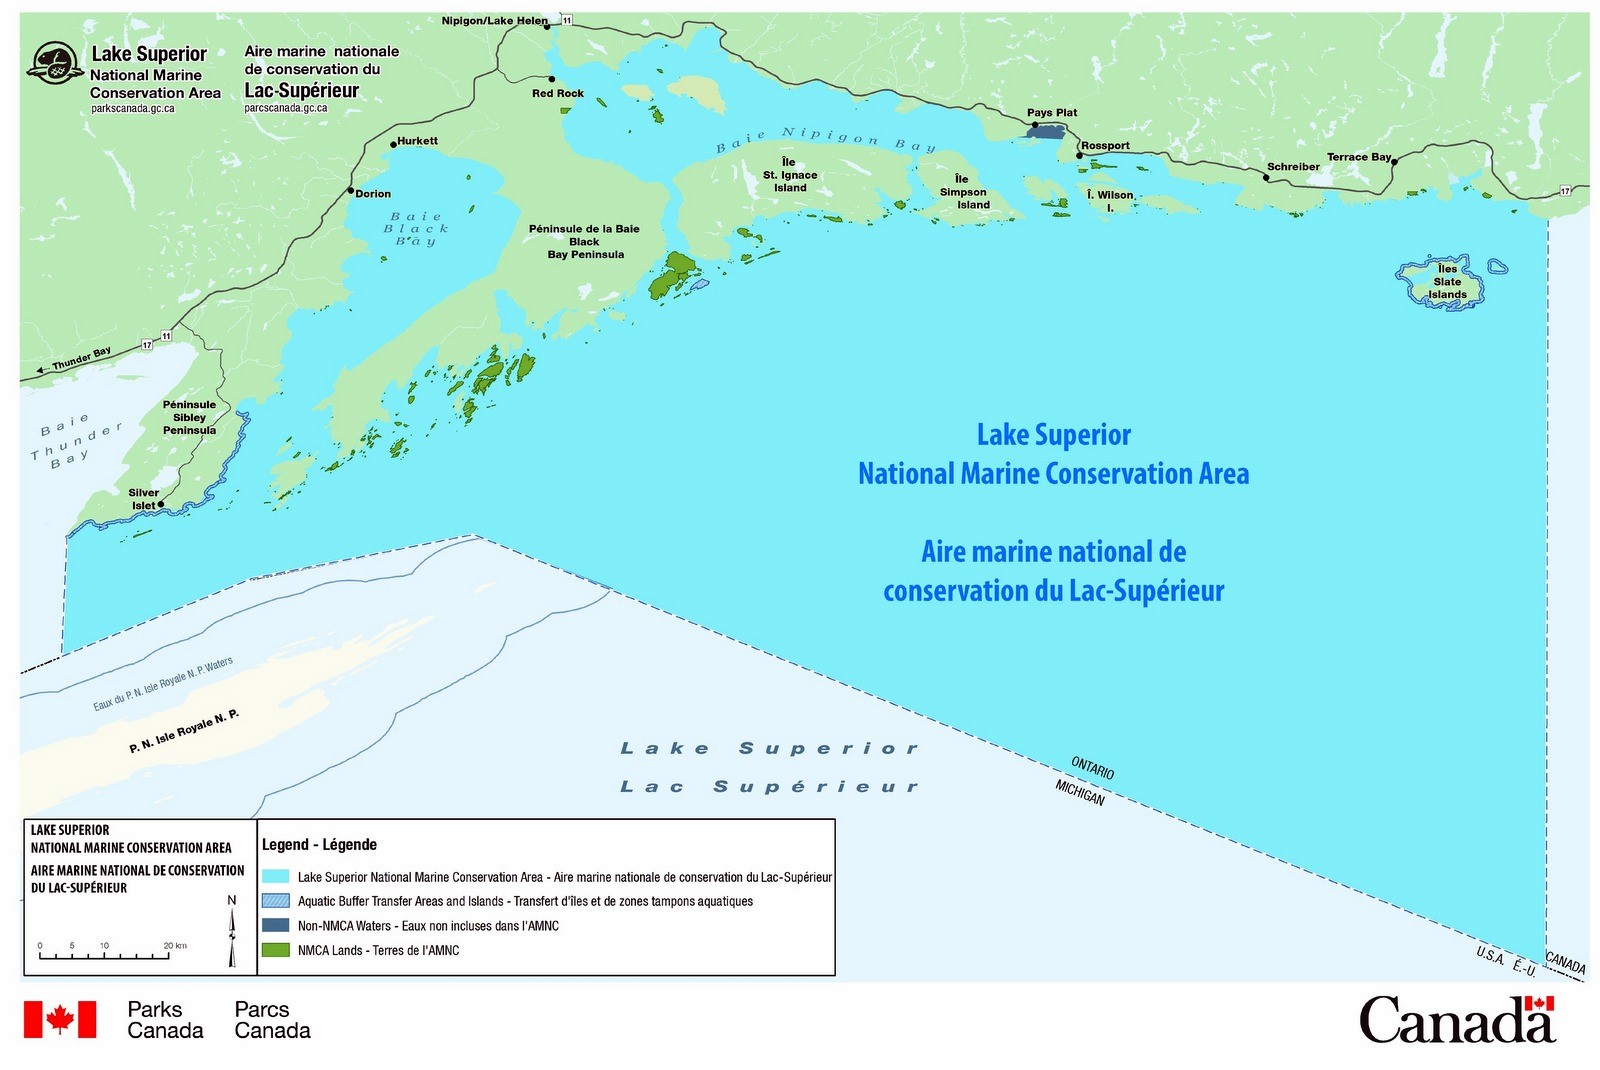 A map of the Lake Superior NMCA in Western Lake Superior. Credit: Parks Canada